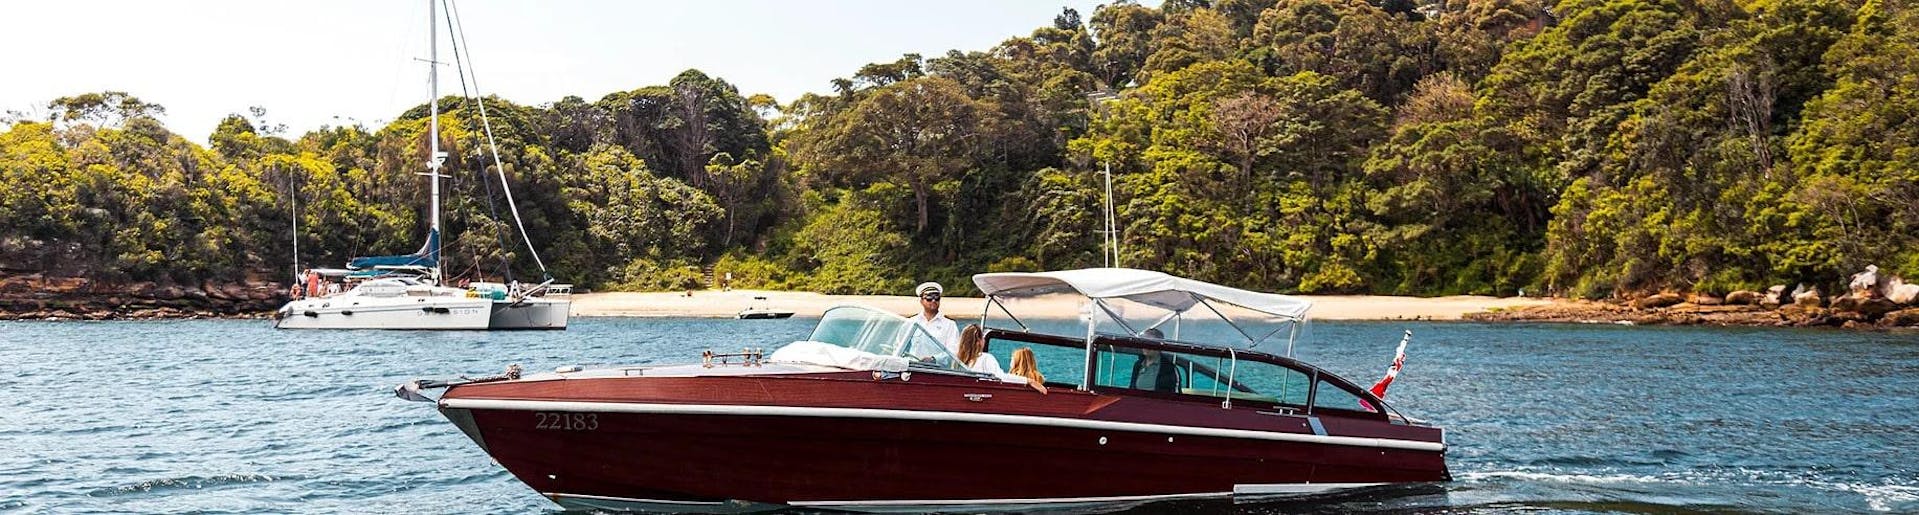 Private Bootstour - Sydney Harbour mit Wildtierbeobachtung & Sightseeing.